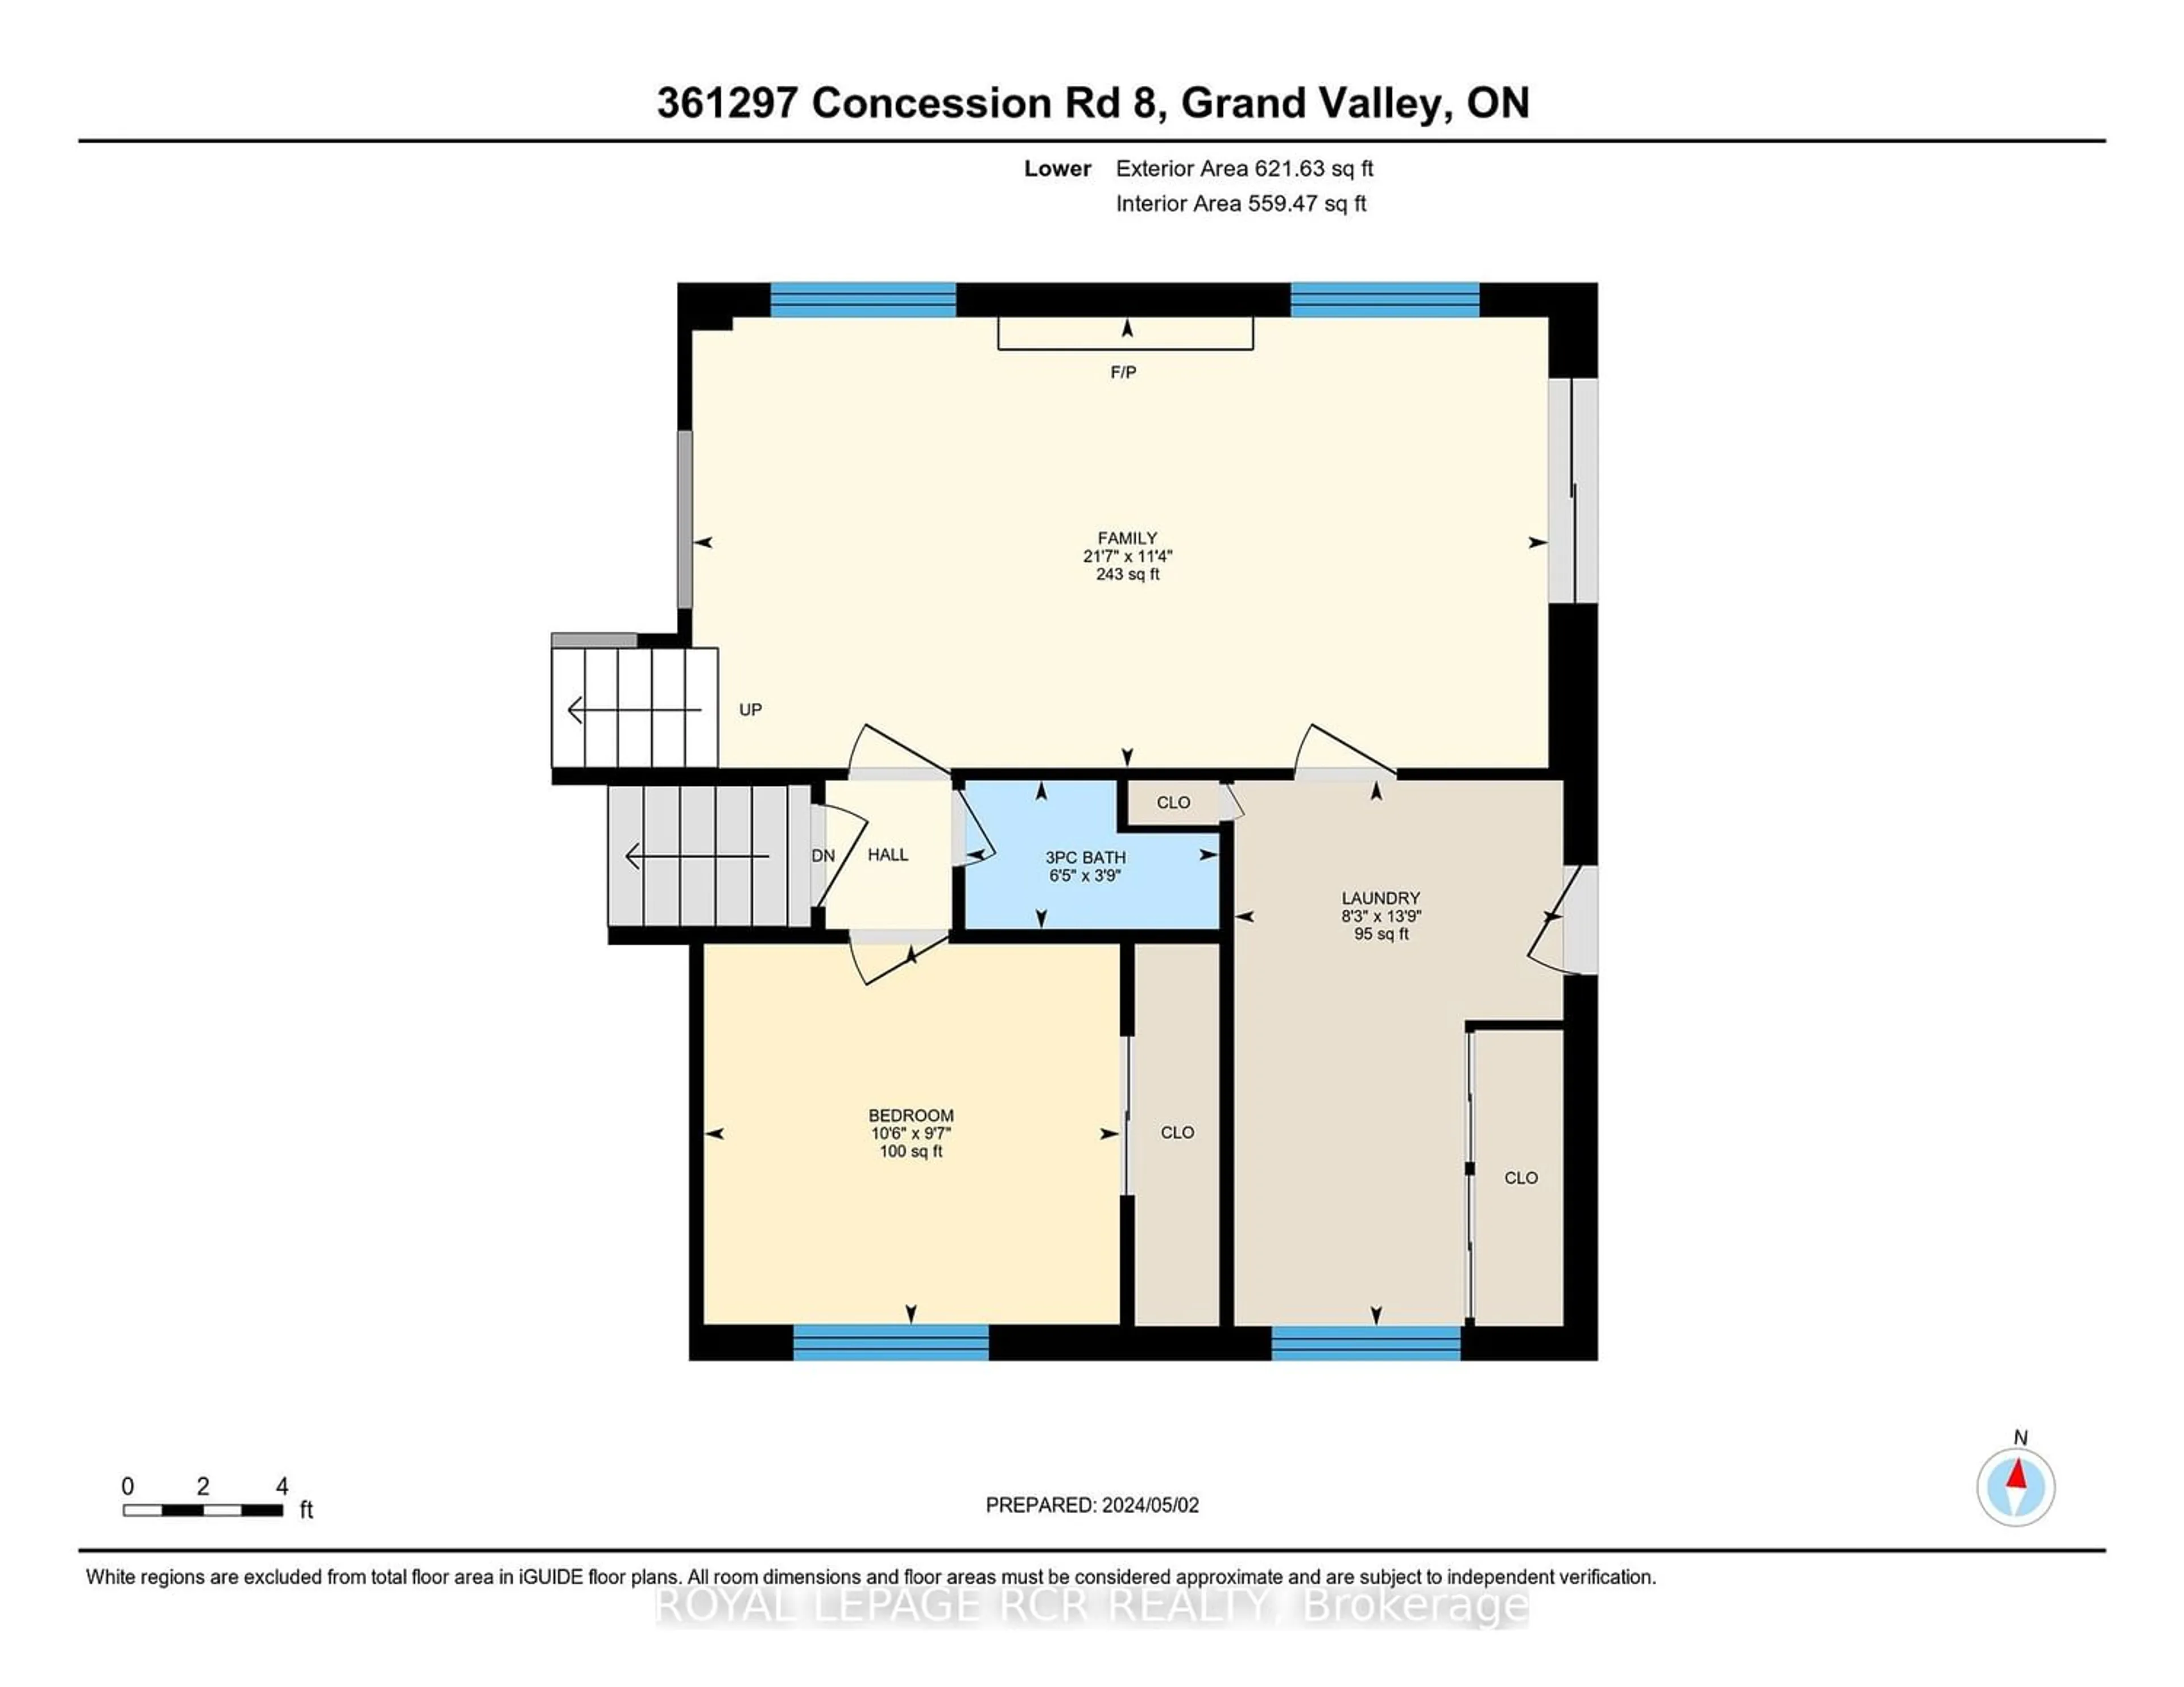 Floor plan for 361297 Concession Road 8/9, East Luther Grand Valley Ontario L9W 0X8